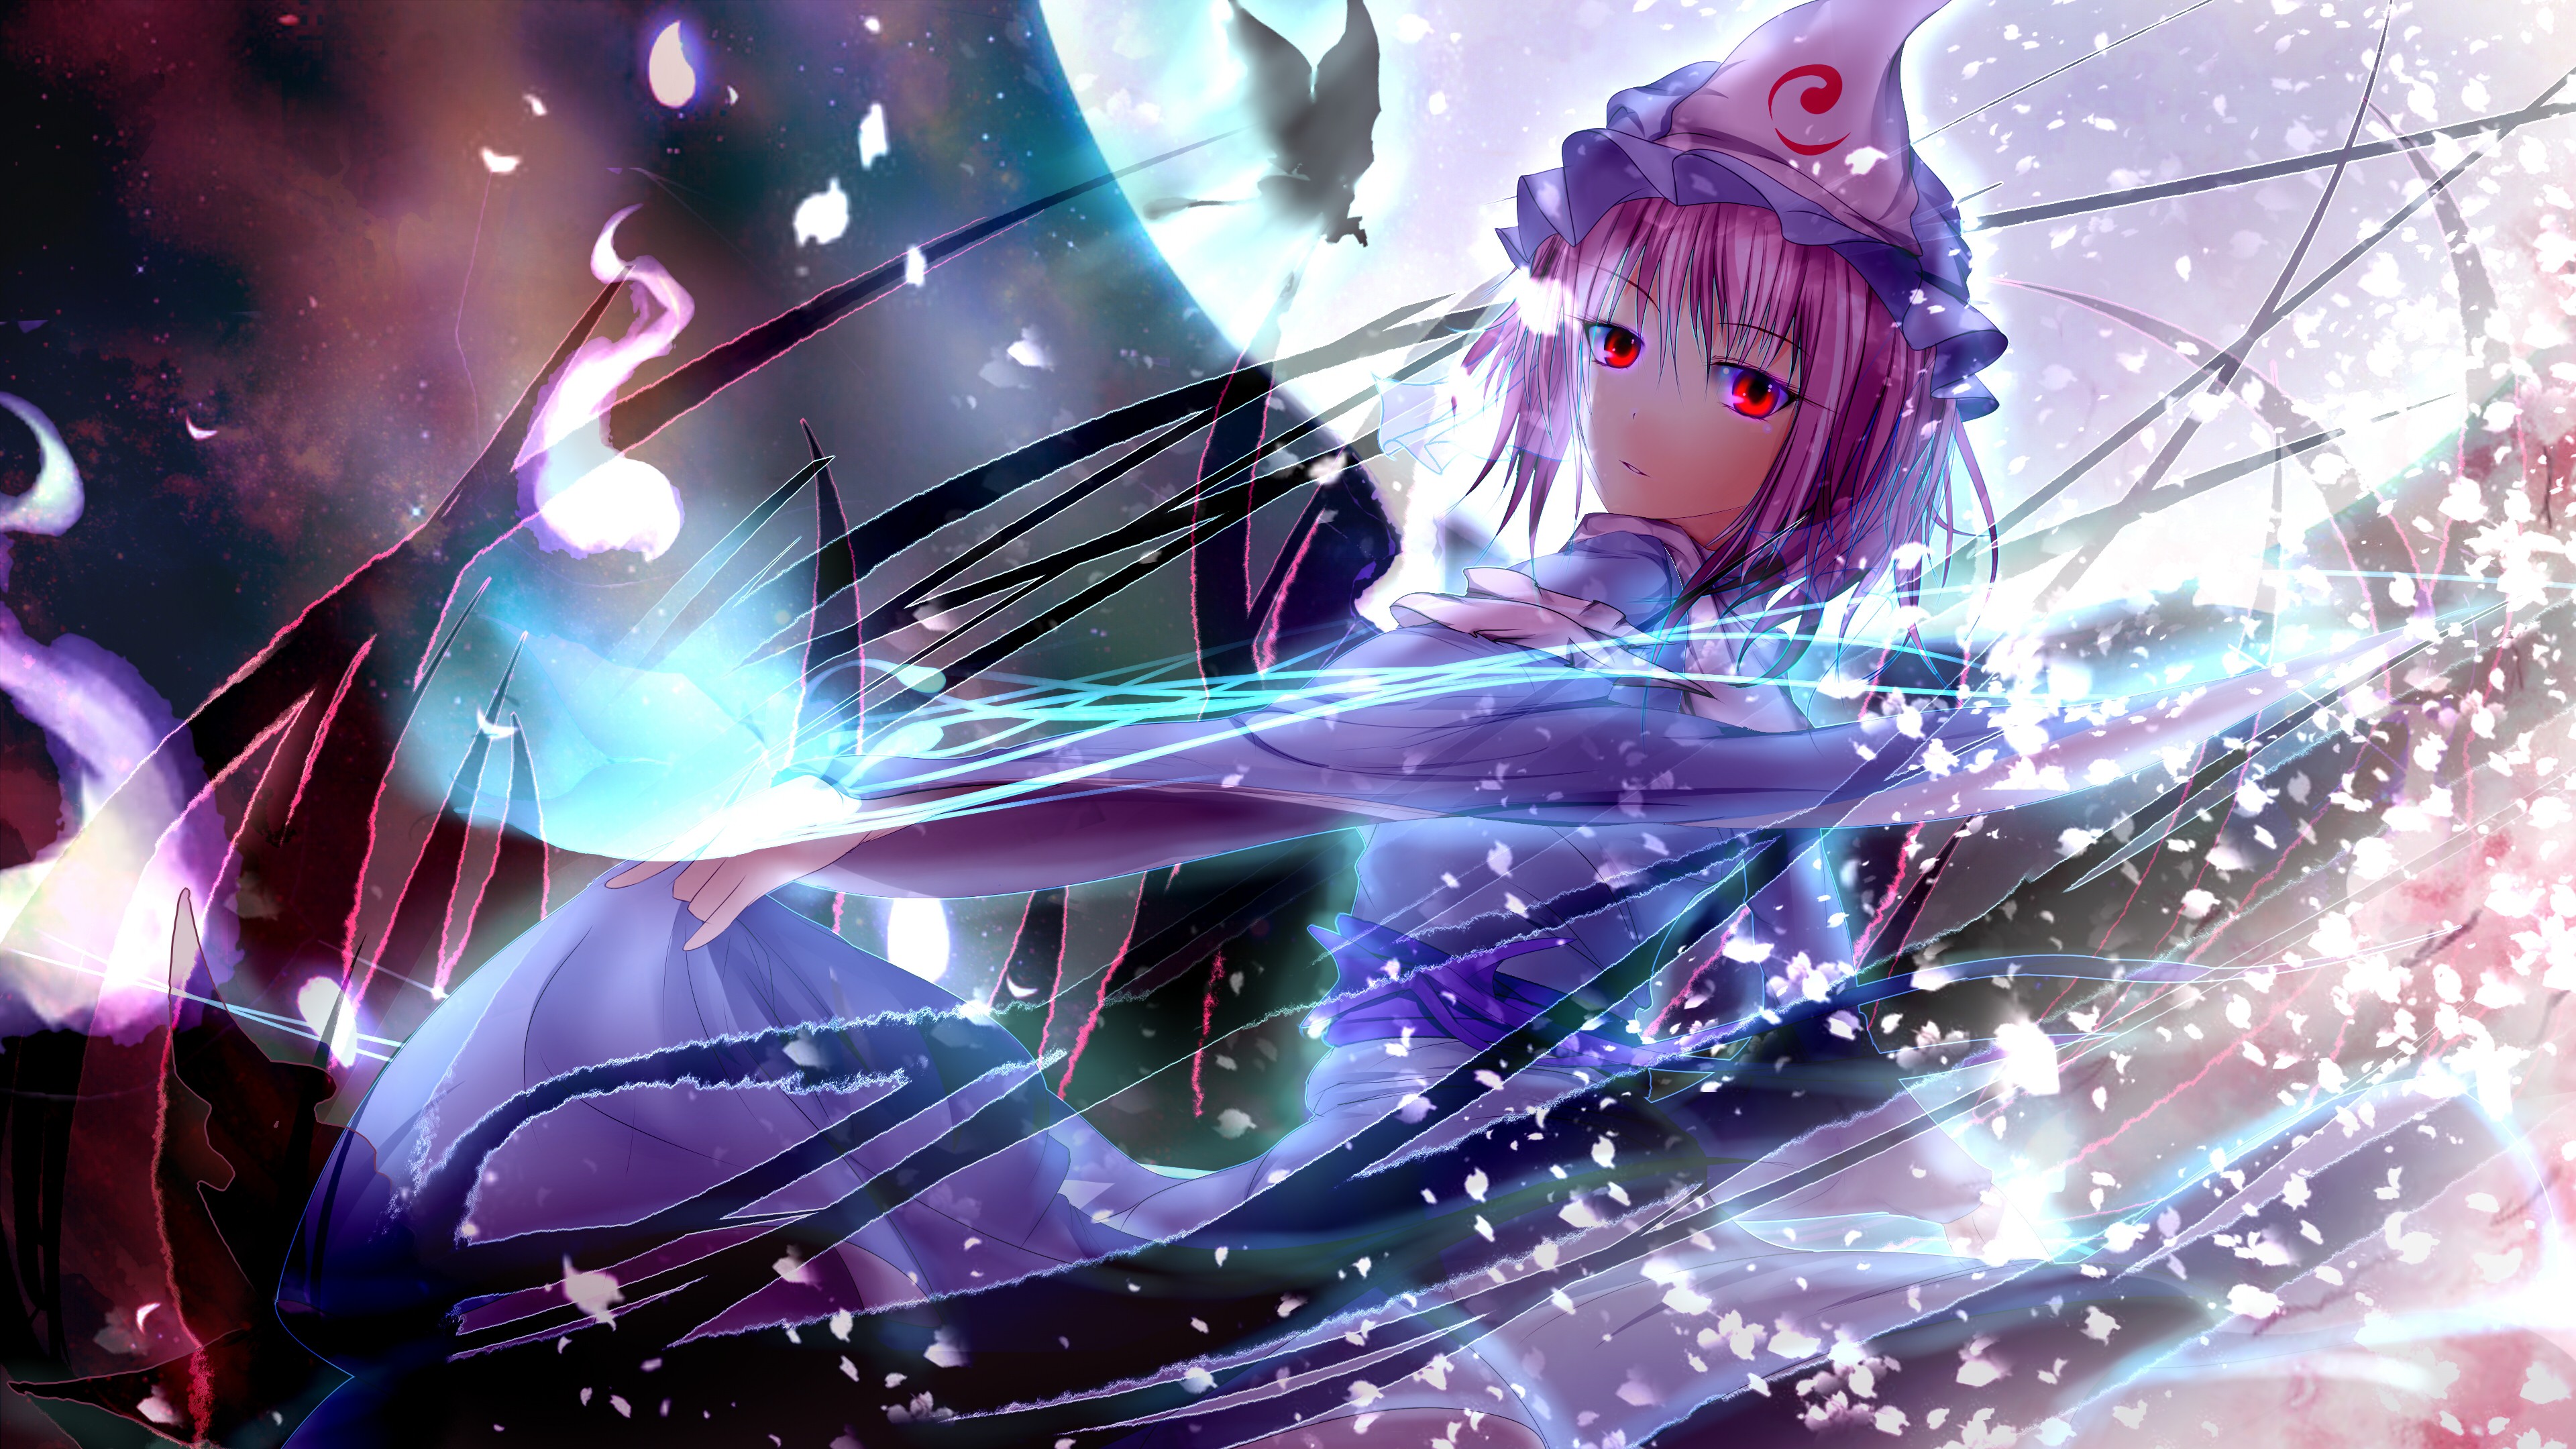 4K Anime wallpaper ·① Download free full HD wallpapers for desktop and
mobile devices in any